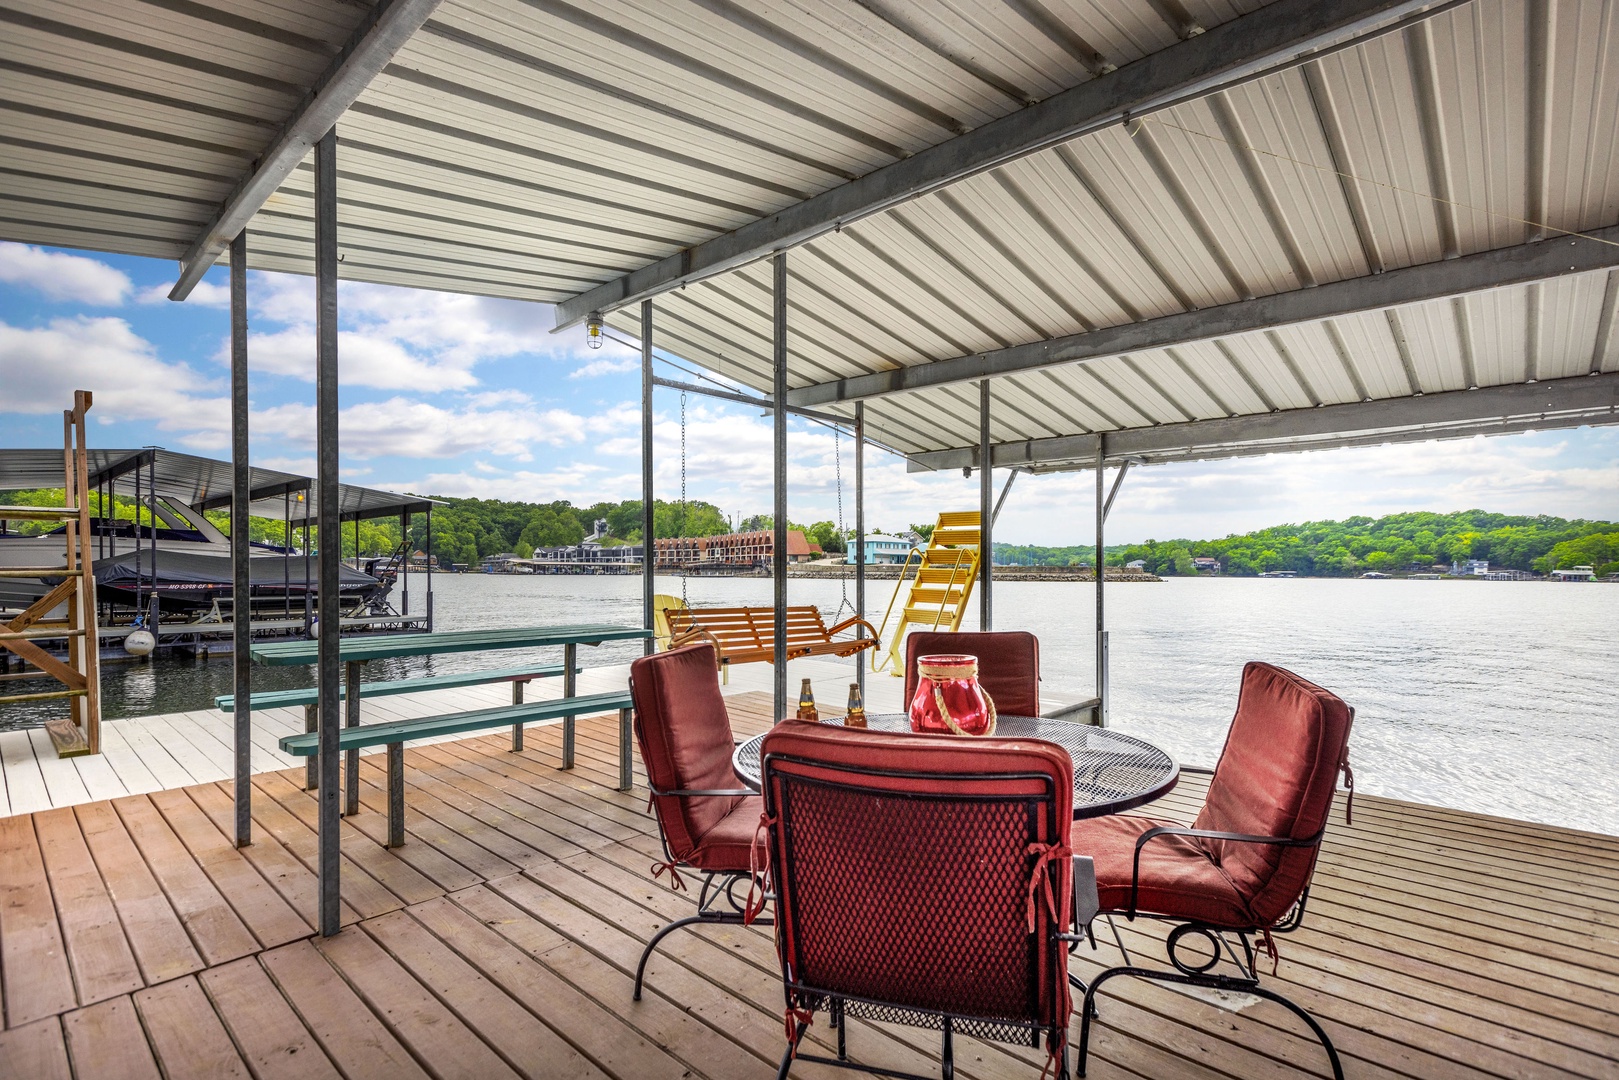 Sink into cozy dock seating while watching the kids swim off the dock